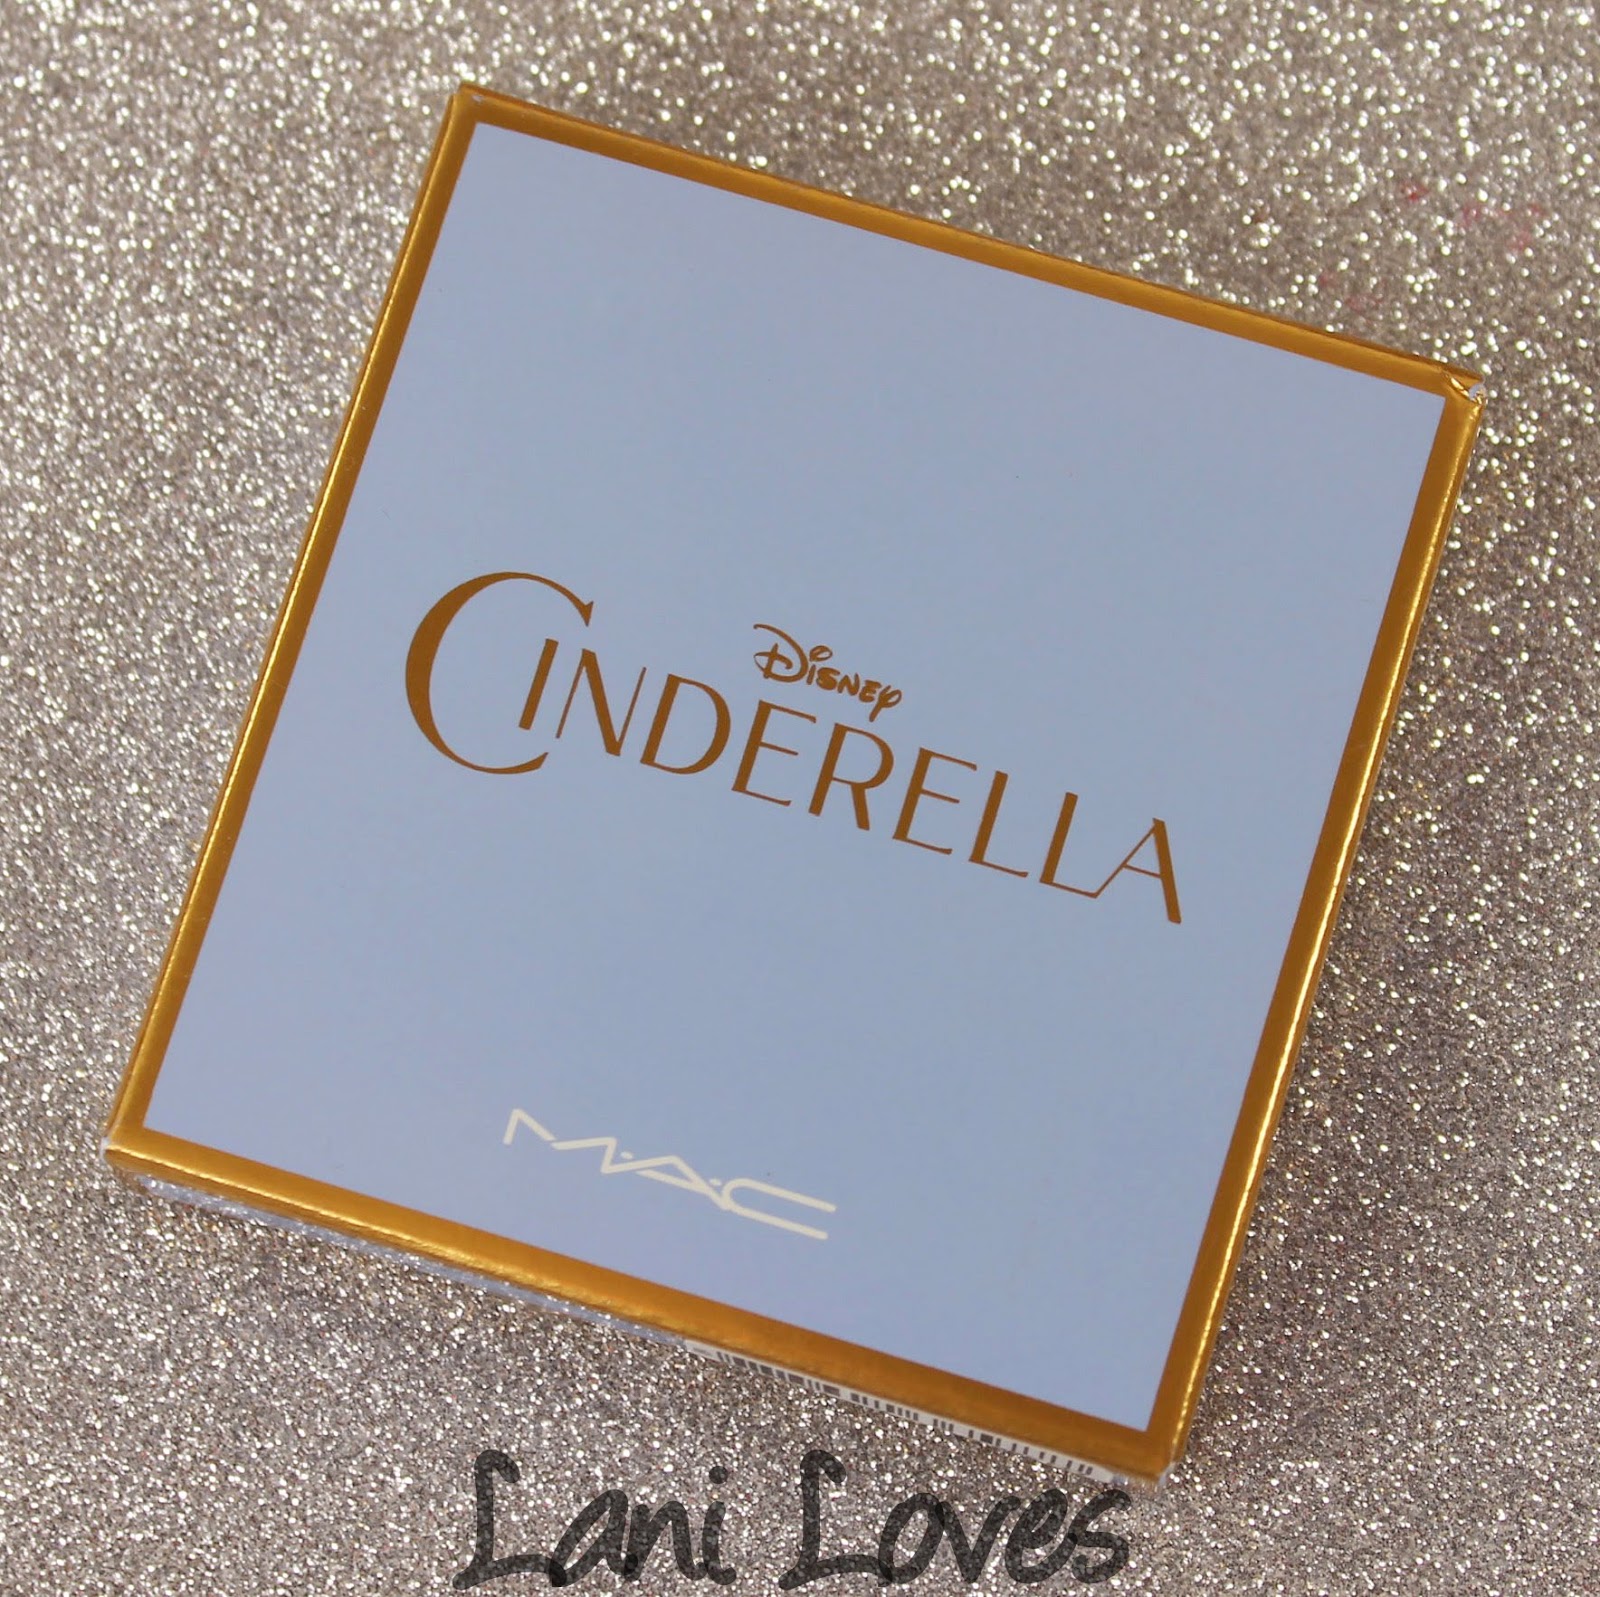 MAC Monday: Cinderella - Stroke of Midnight Eye Shadow x6 Swatches & Review